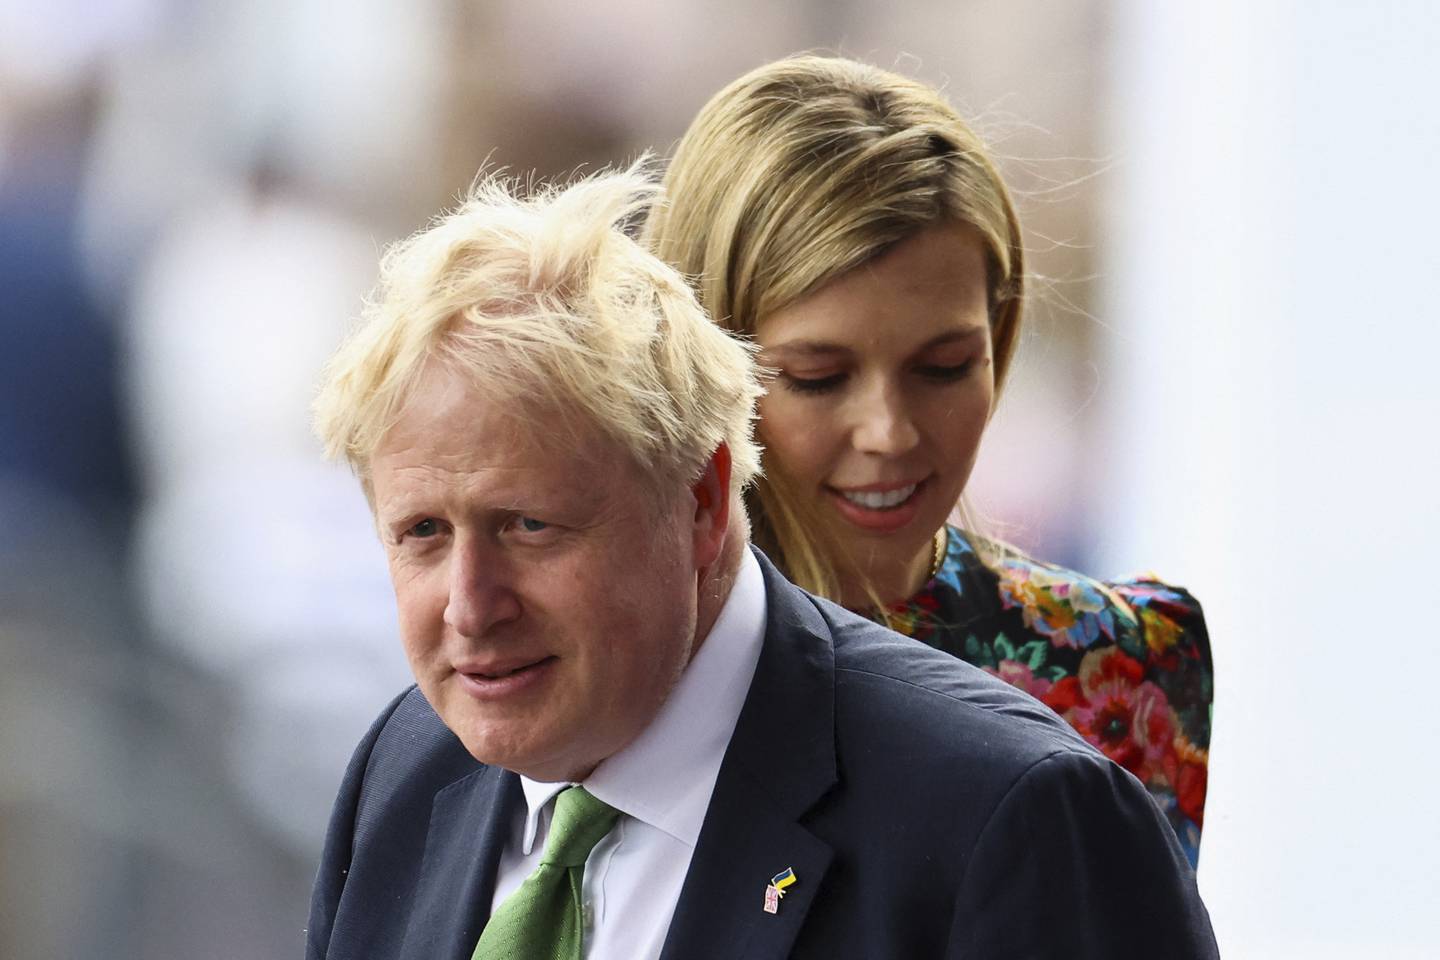 Boris Johnson lives in the Downing Street flat with his wife Carrie. AP